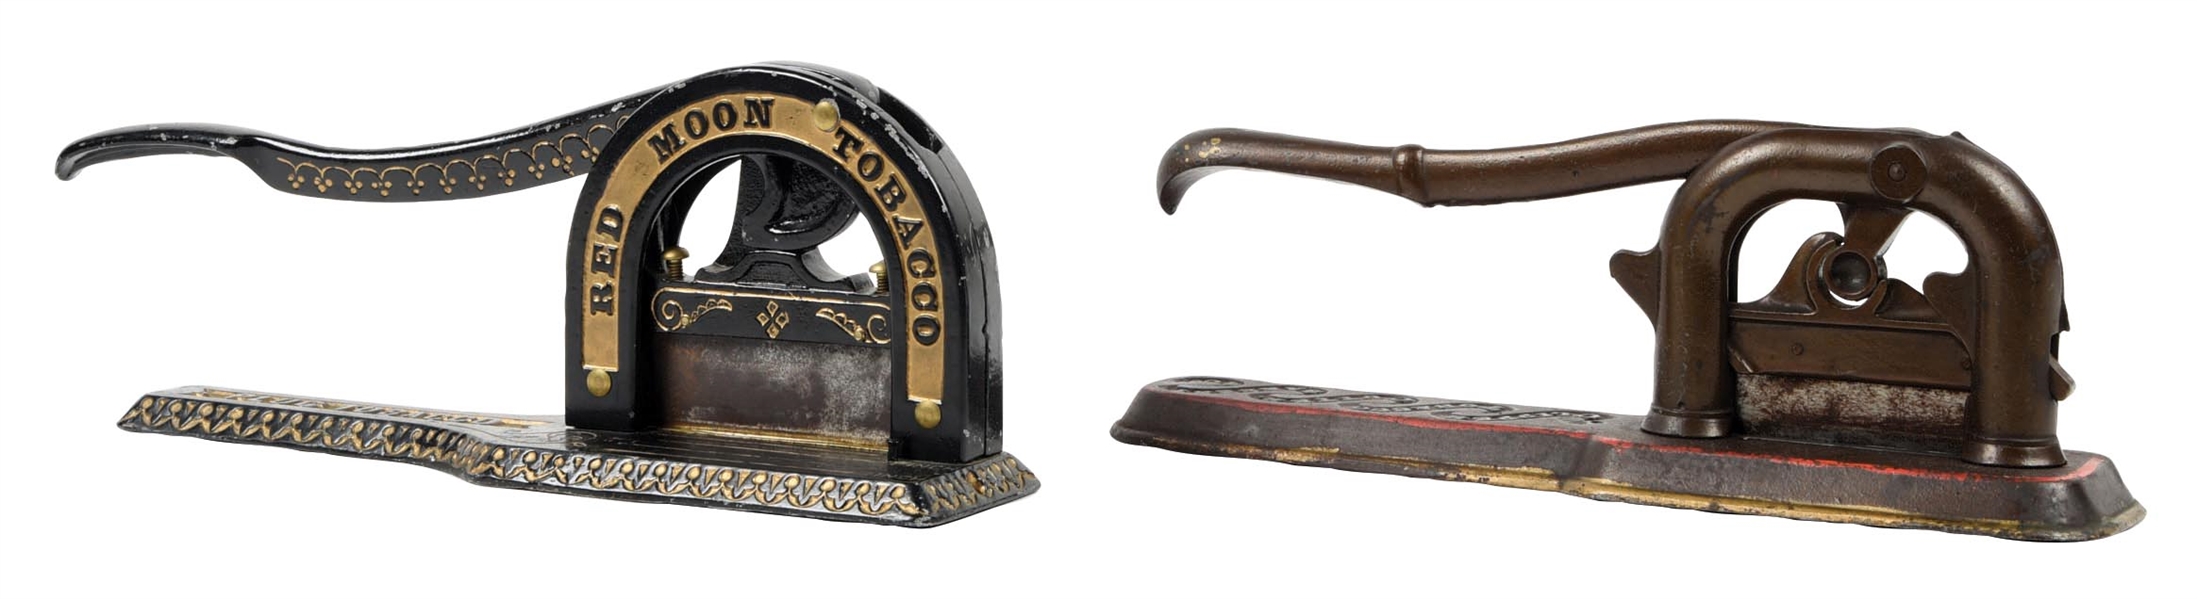 PAIR OF CAST IRON TOBACCO CUTTERS